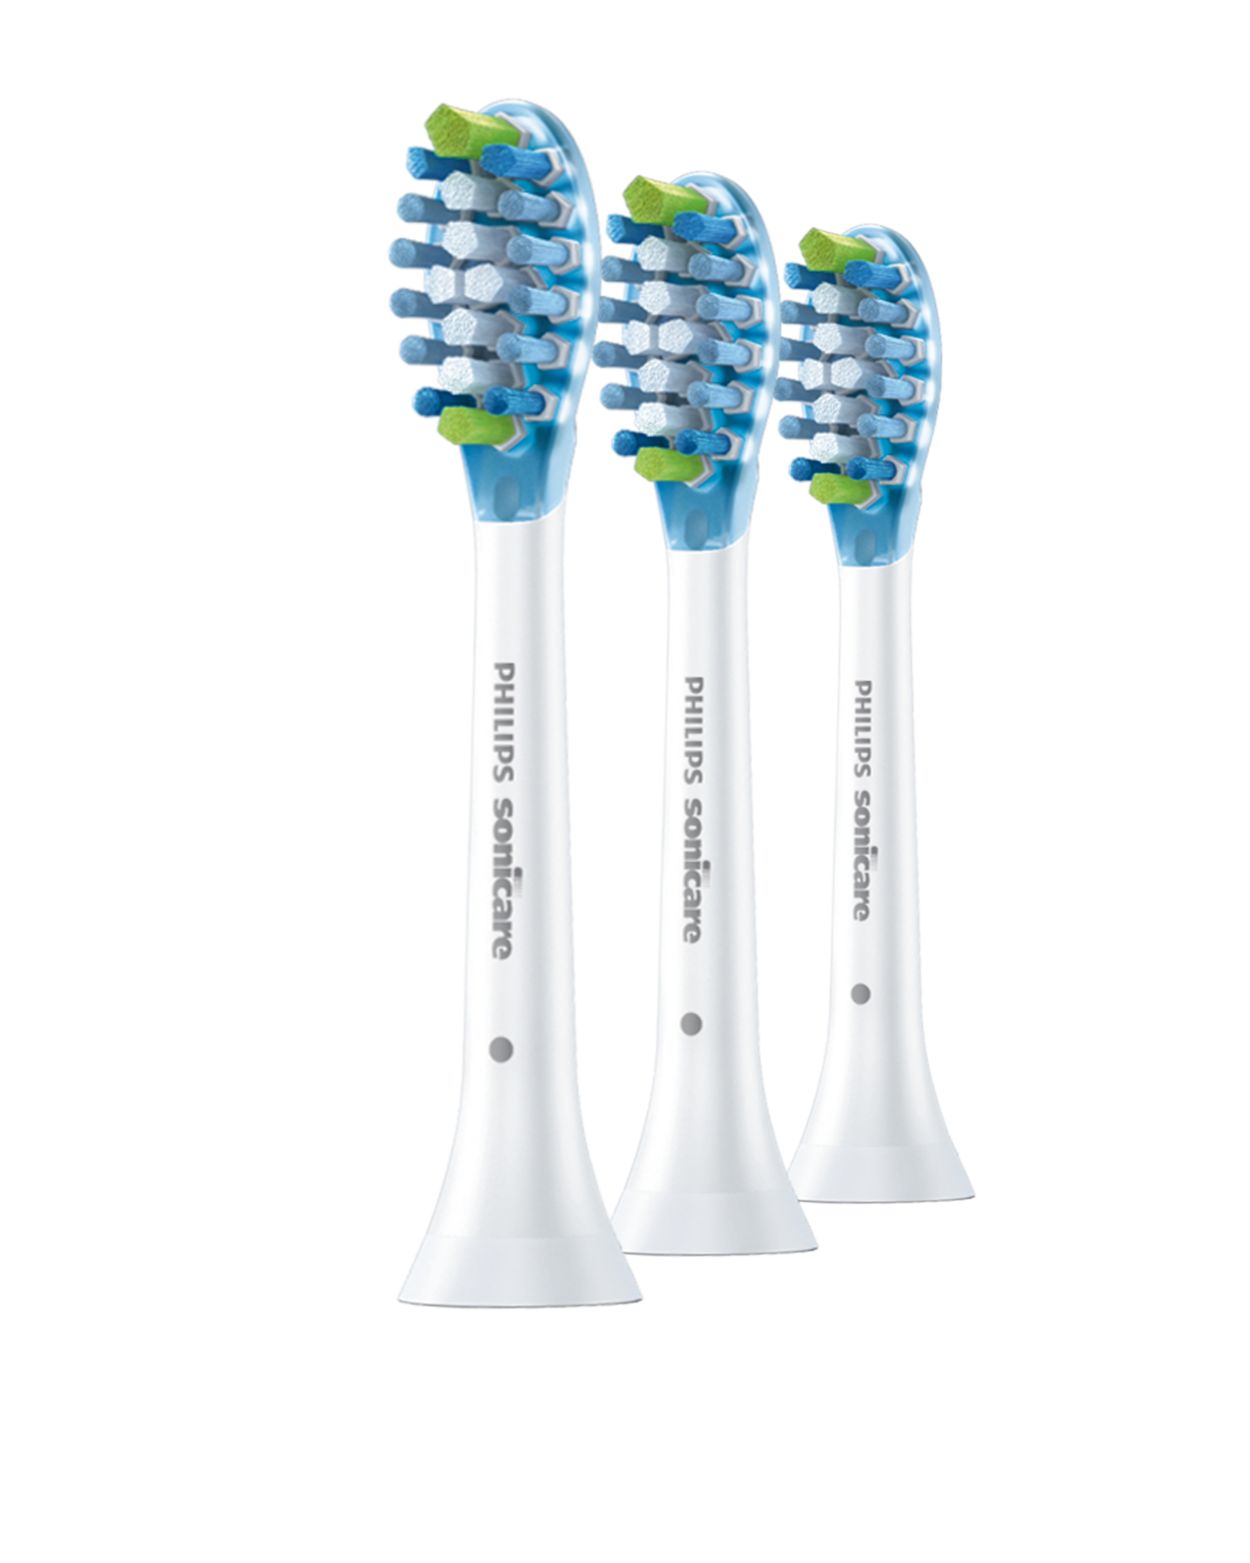 adaptiveclean-standard-sonic-toothbrush-heads-hx9043-64-sonicare